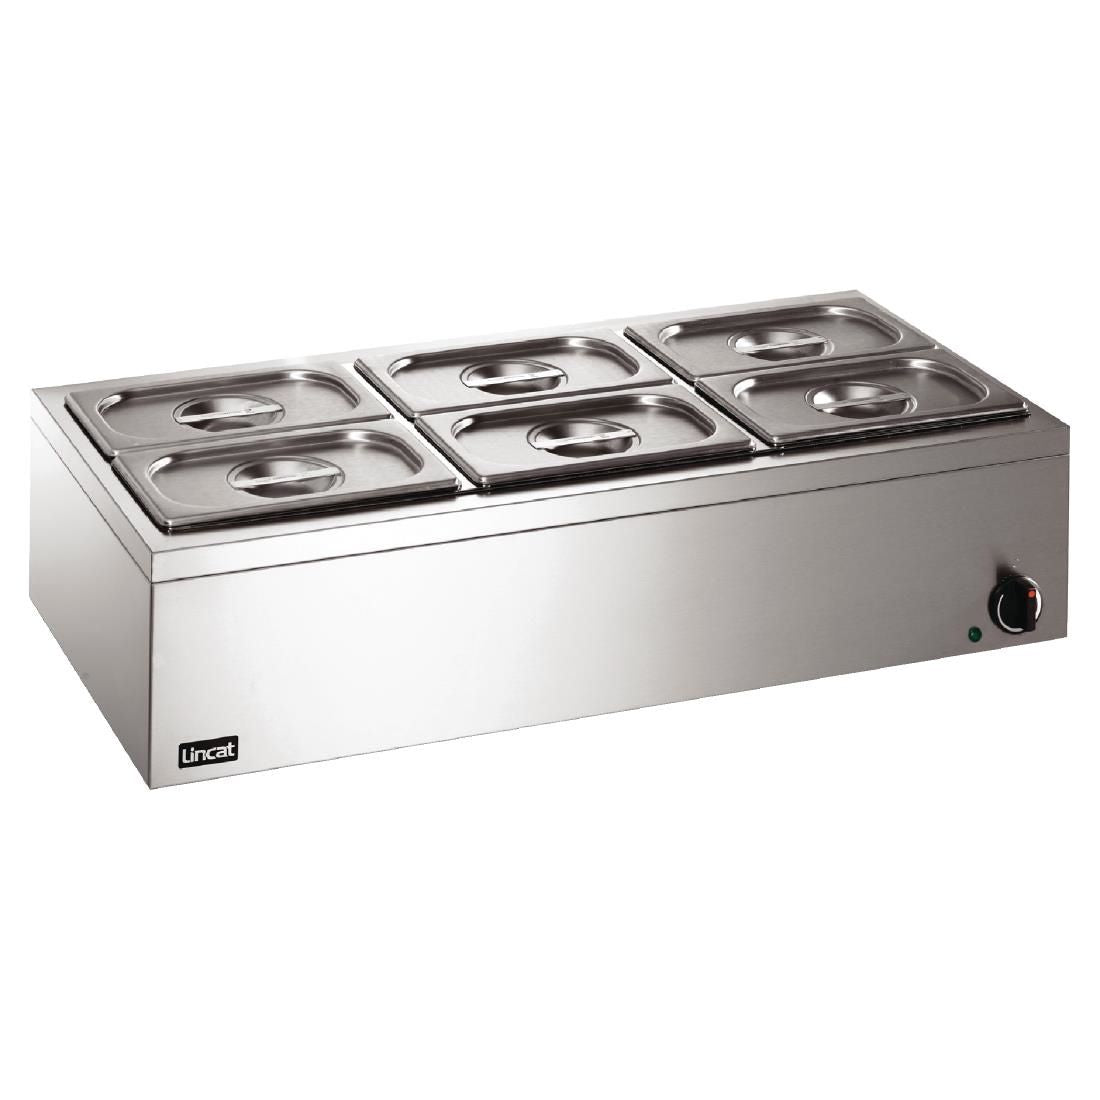 LBM3W - Lincat Lynx 400 Electric Counter-top Bain Marie - Wet Heat - inc. 6 x 1/4 GN Dishes - W 850 mm - 0.75 kW DN689 JD Catering Equipment Solutions Ltd